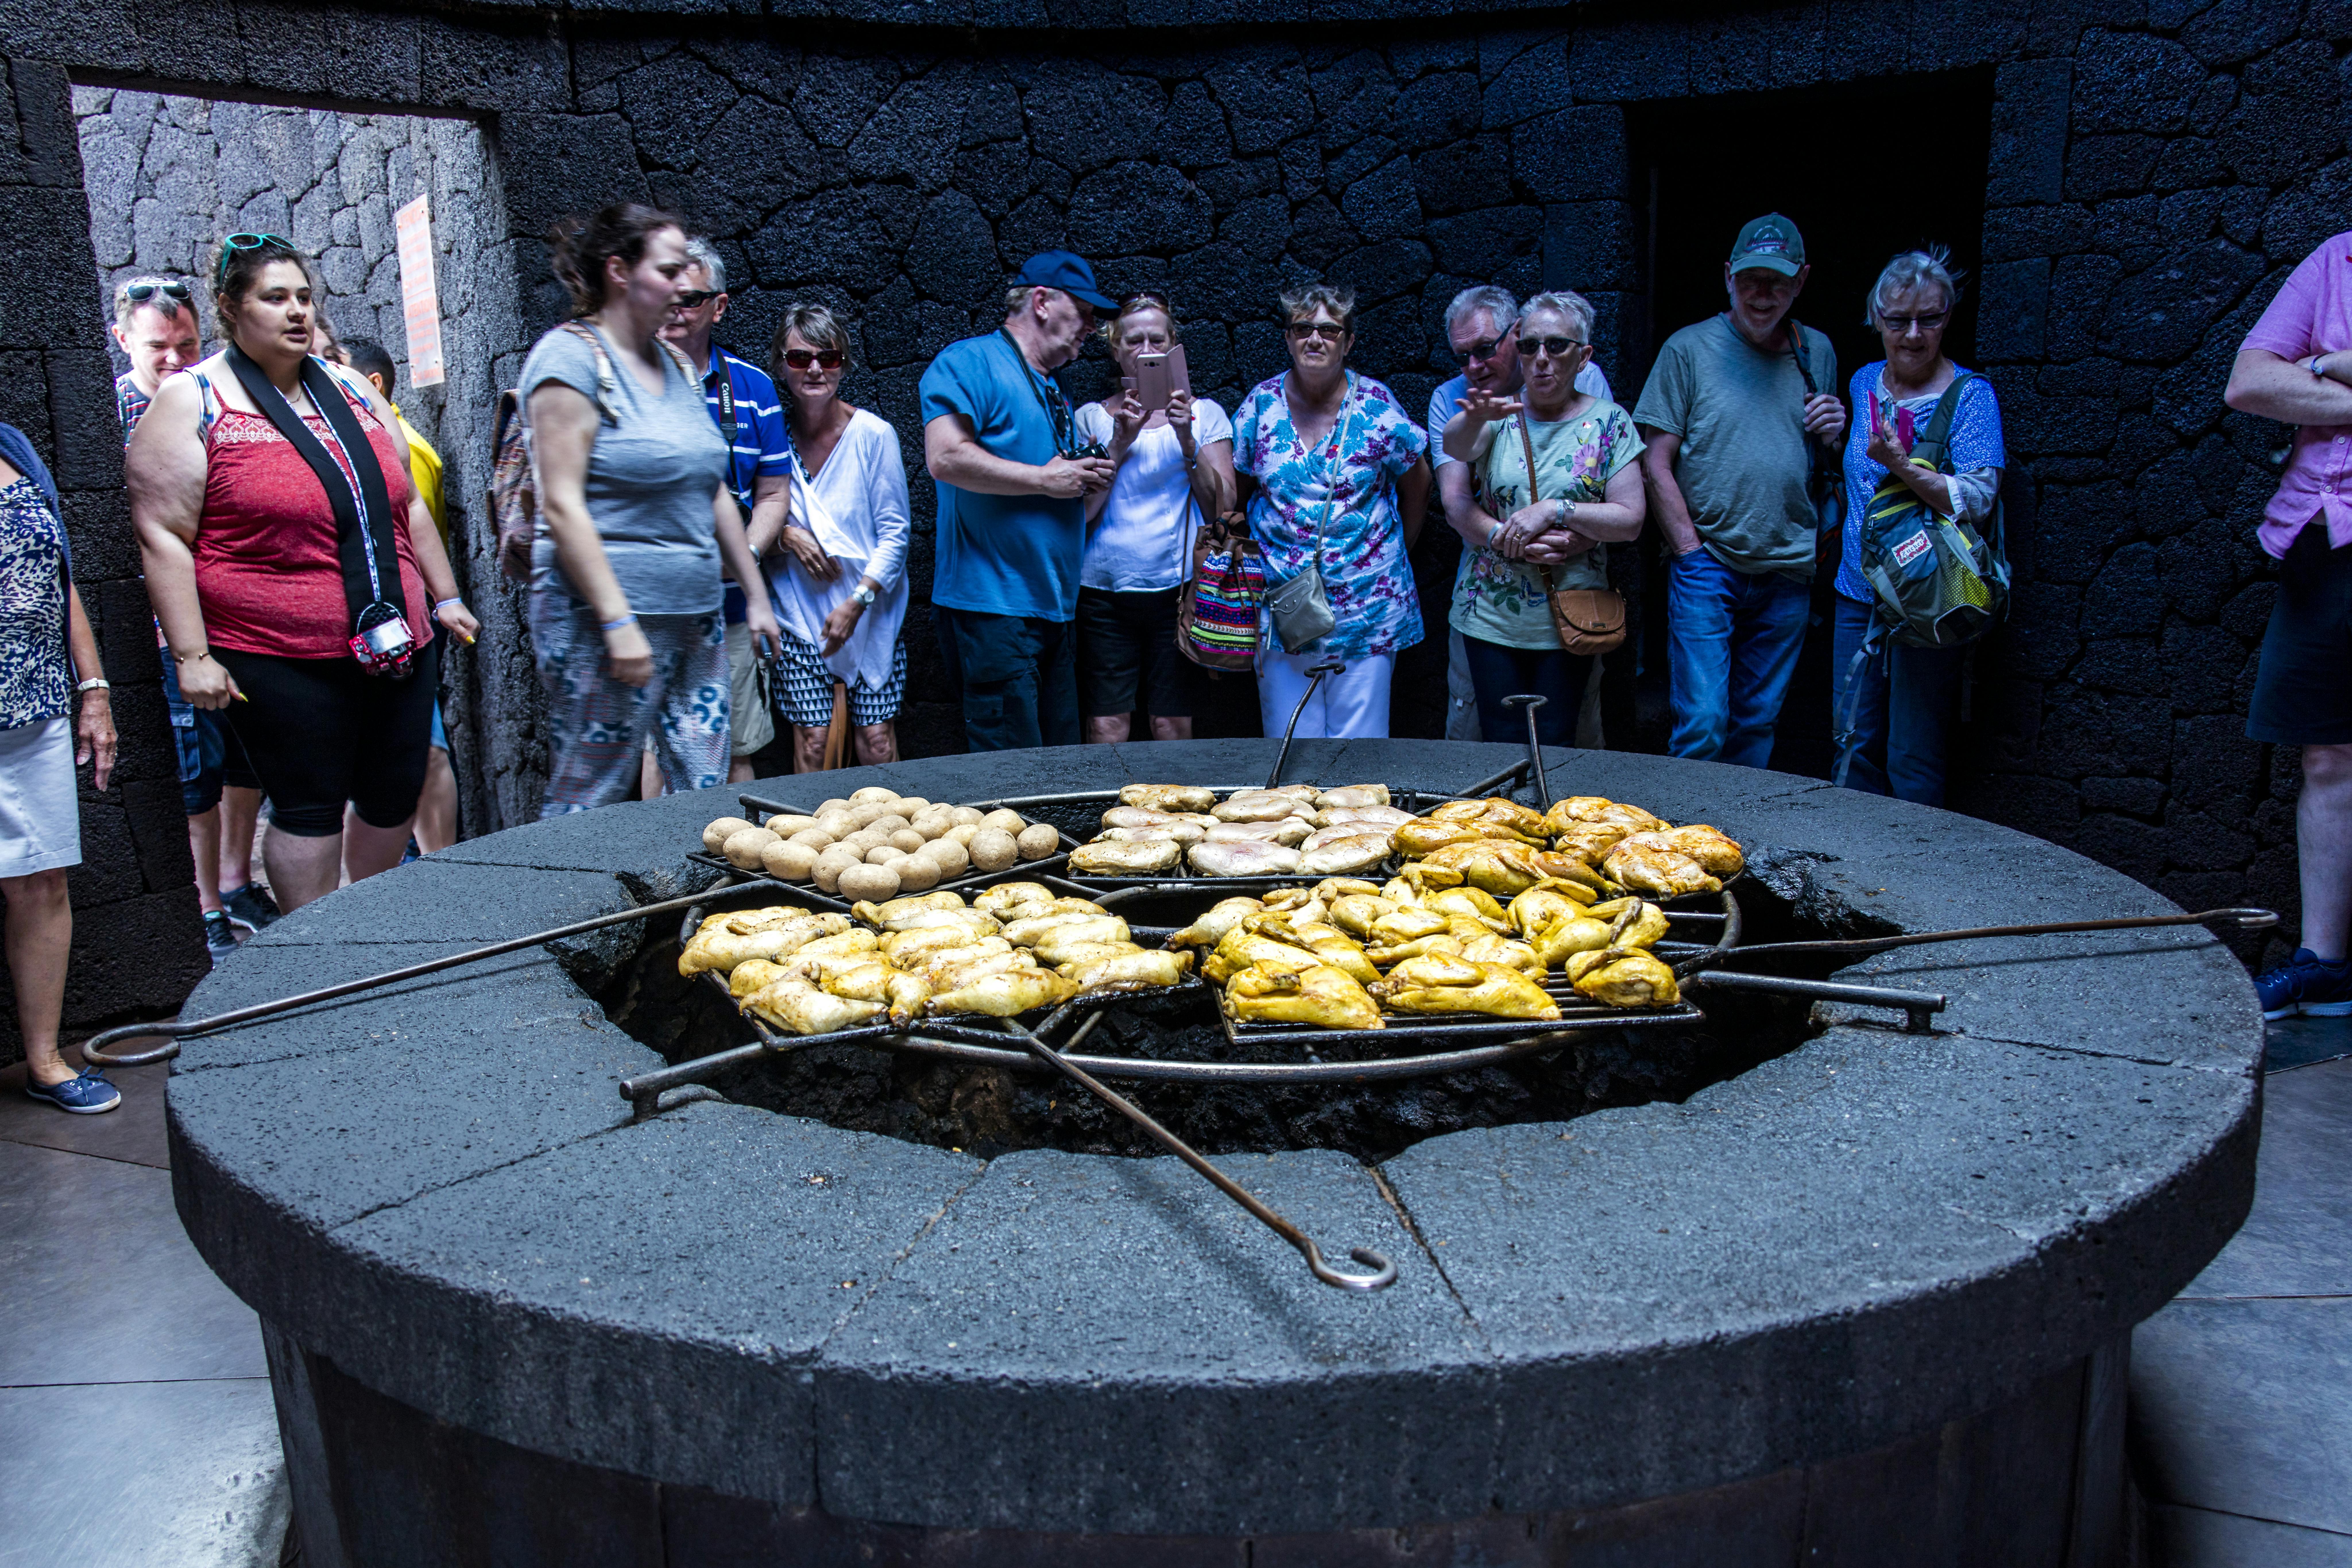 Lanzarote Volcano Tour with BBQ